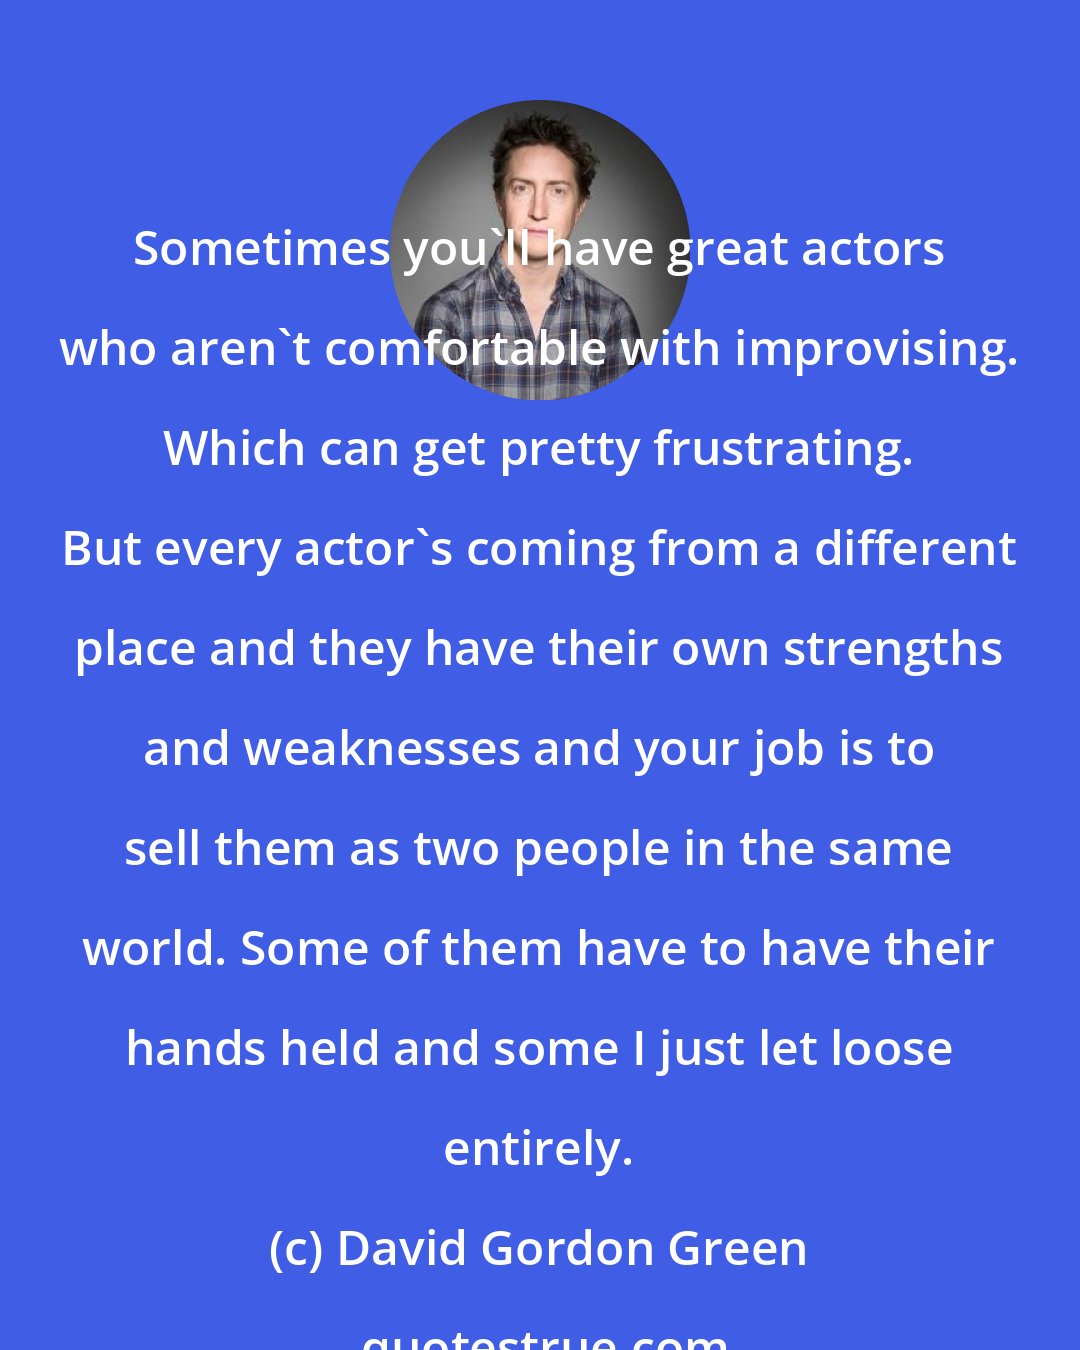 David Gordon Green: Sometimes you'll have great actors who aren't comfortable with improvising. Which can get pretty frustrating. But every actor's coming from a different place and they have their own strengths and weaknesses and your job is to sell them as two people in the same world. Some of them have to have their hands held and some I just let loose entirely.